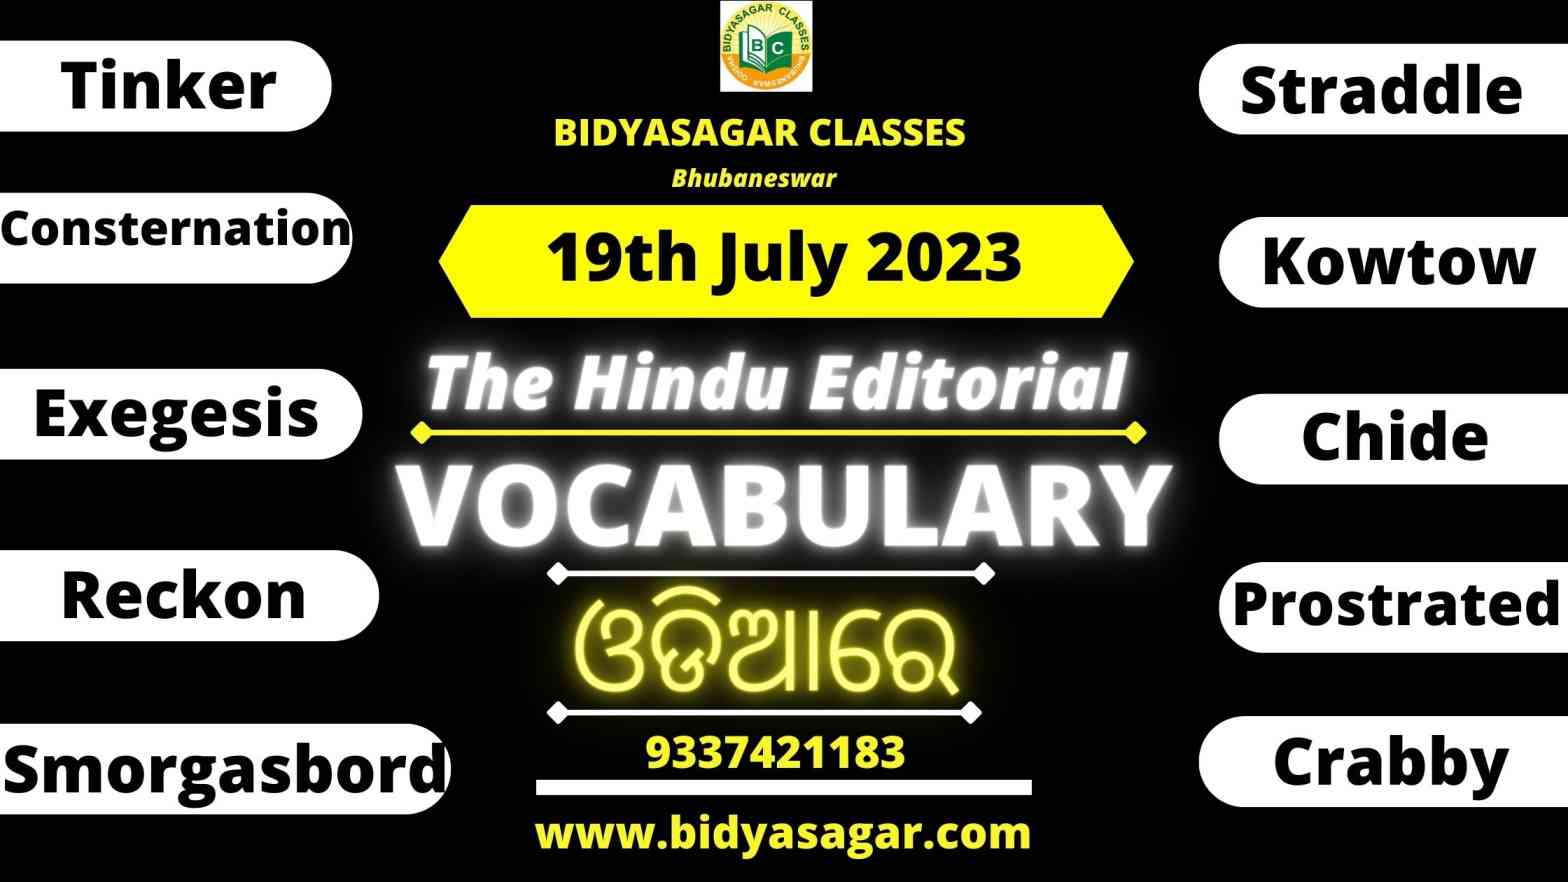 The Hindu Editorial Vocabulary of 19th July 2023